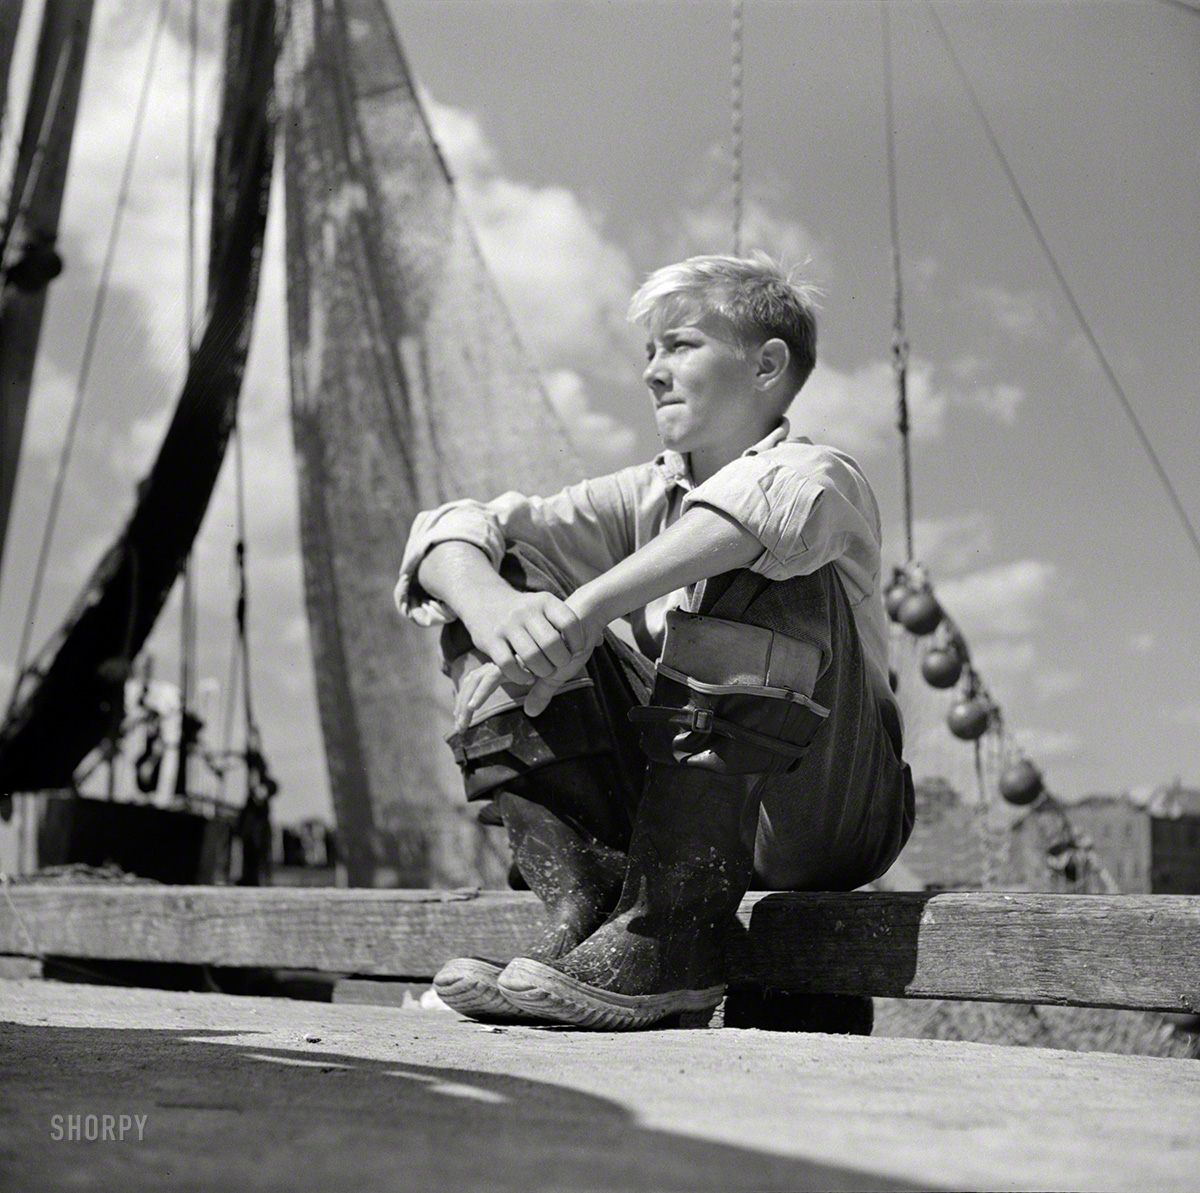 Sept. 1942. Gloucester, Mass. "A young boy, probably a fisherman of tomorrow, because many of the boys will follow their fathers as fishermen in the New England waters." Photo by Howard Liberman, Office of War Information. View full size.